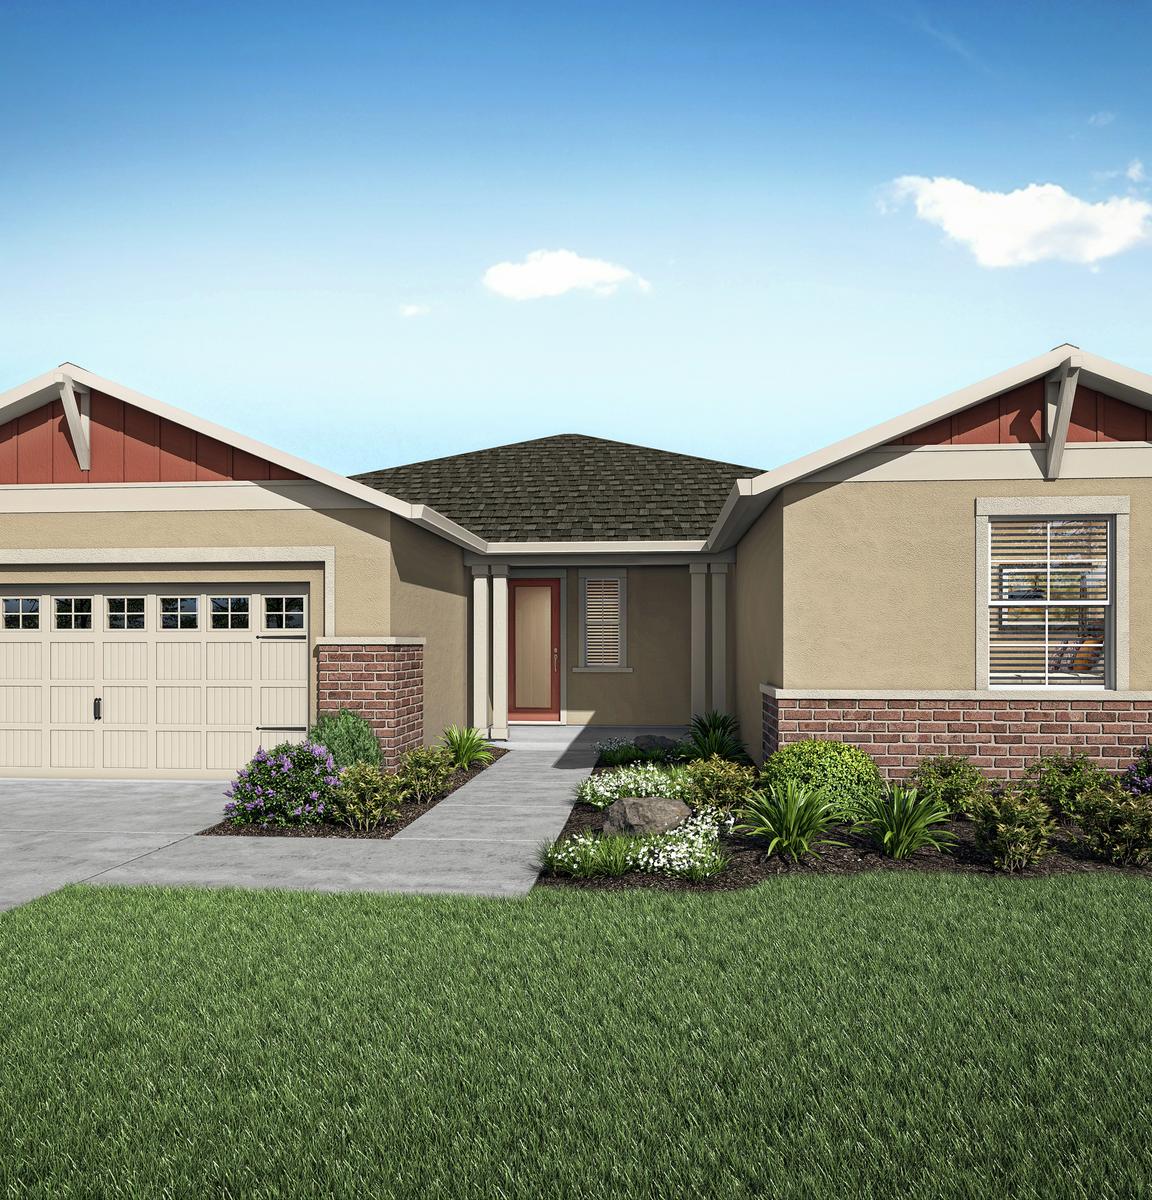 The Roosevelt plan is a single-story home with tan stucco and red siding accents.